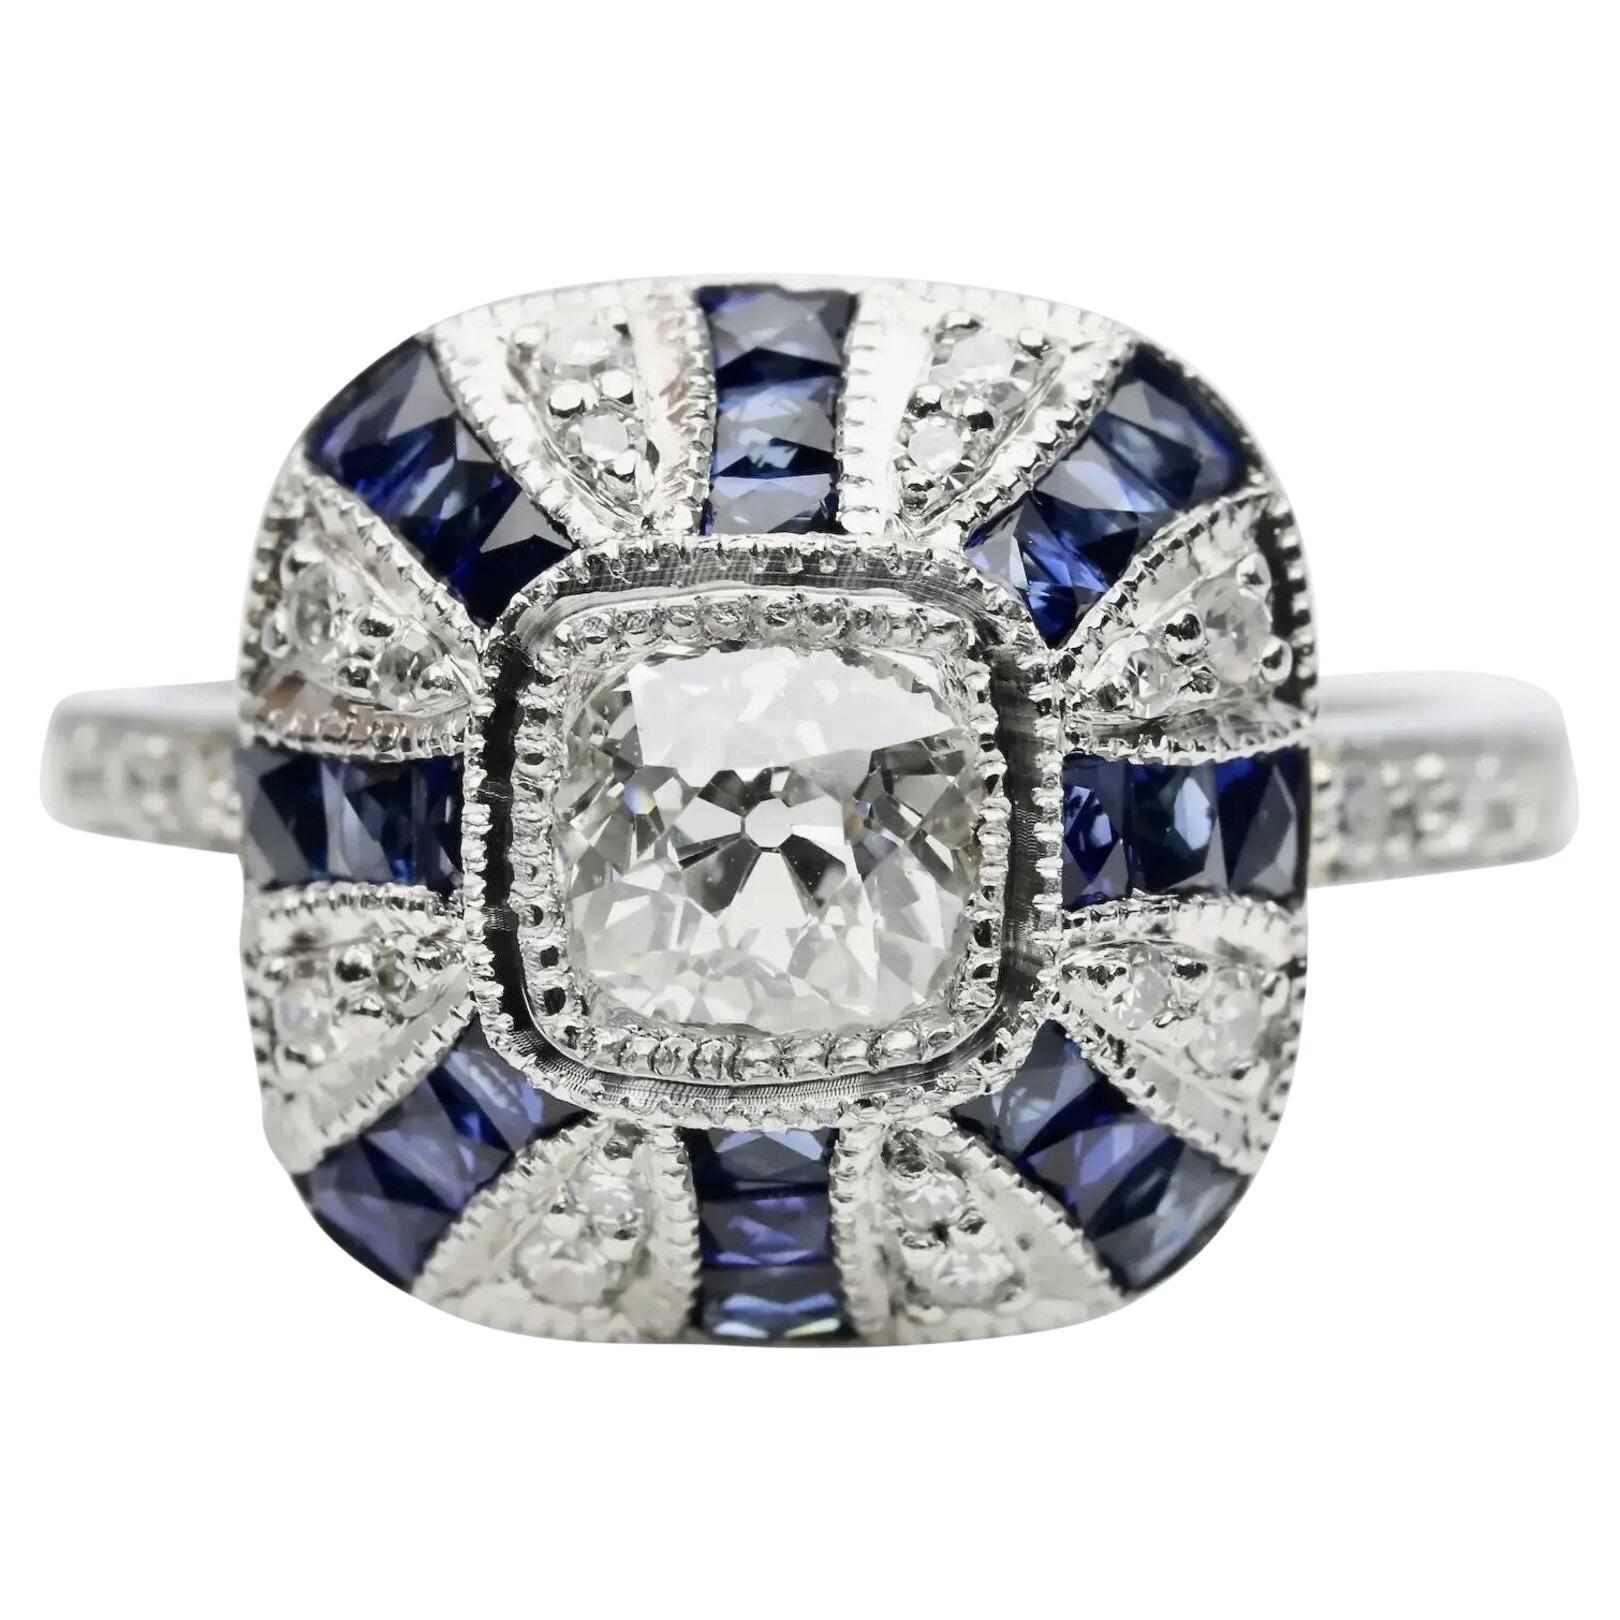 Dramatic Art Deco Diamond & French Cut Sapphire Ring in Platinum For Sale